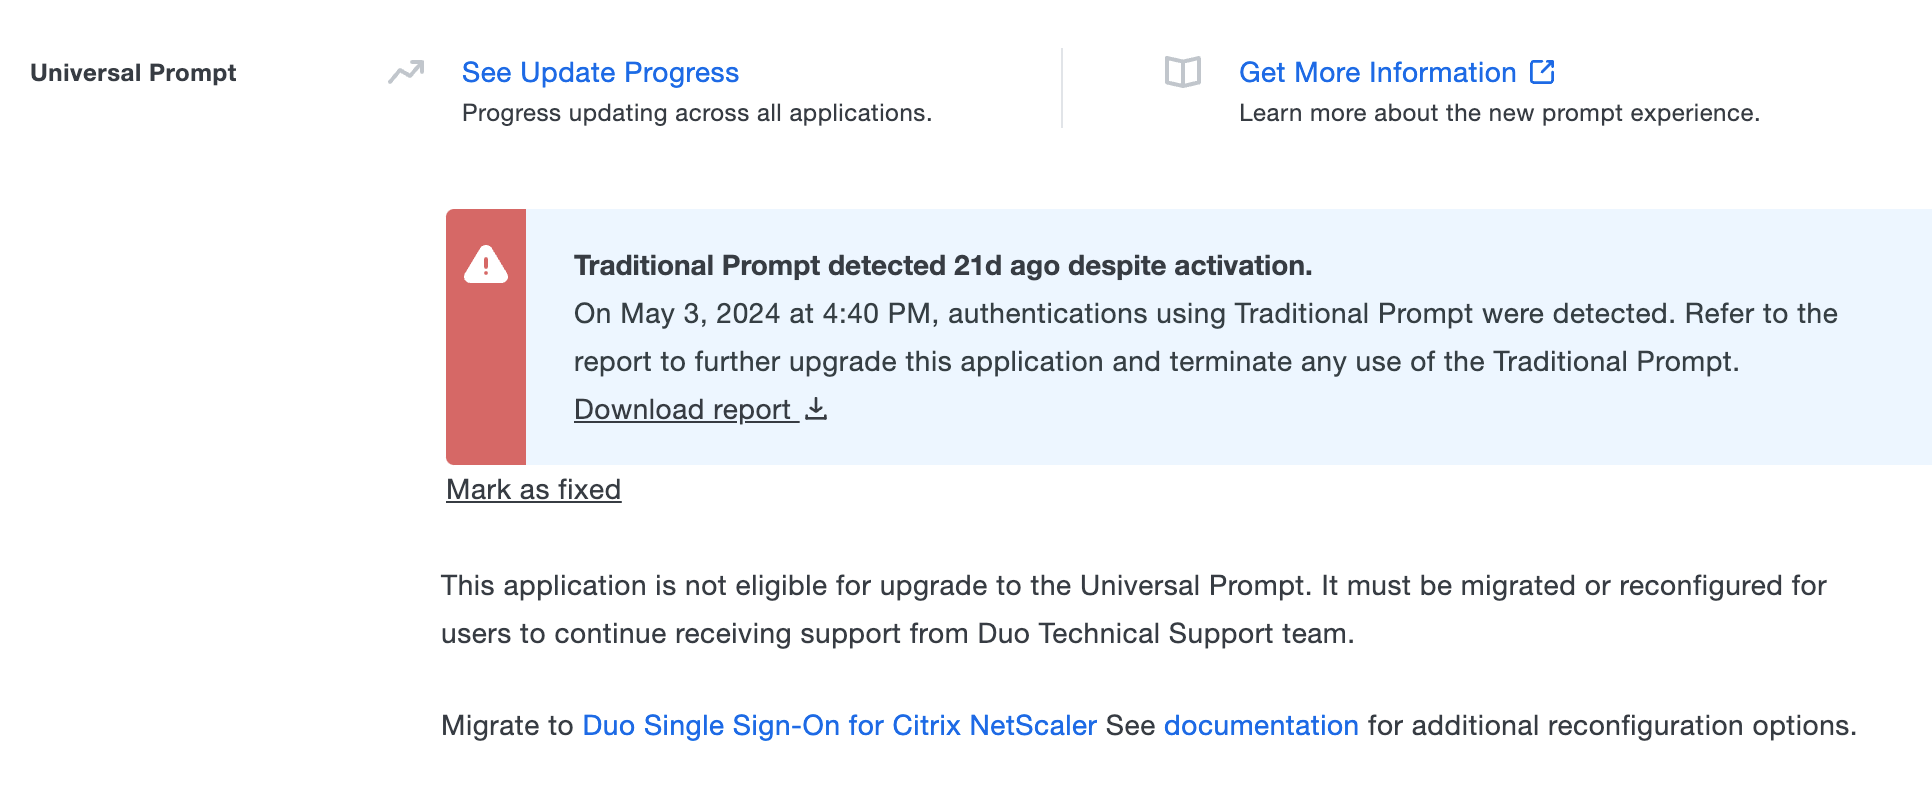 Universal Prompt Info - Traditional Prompt Use Detected